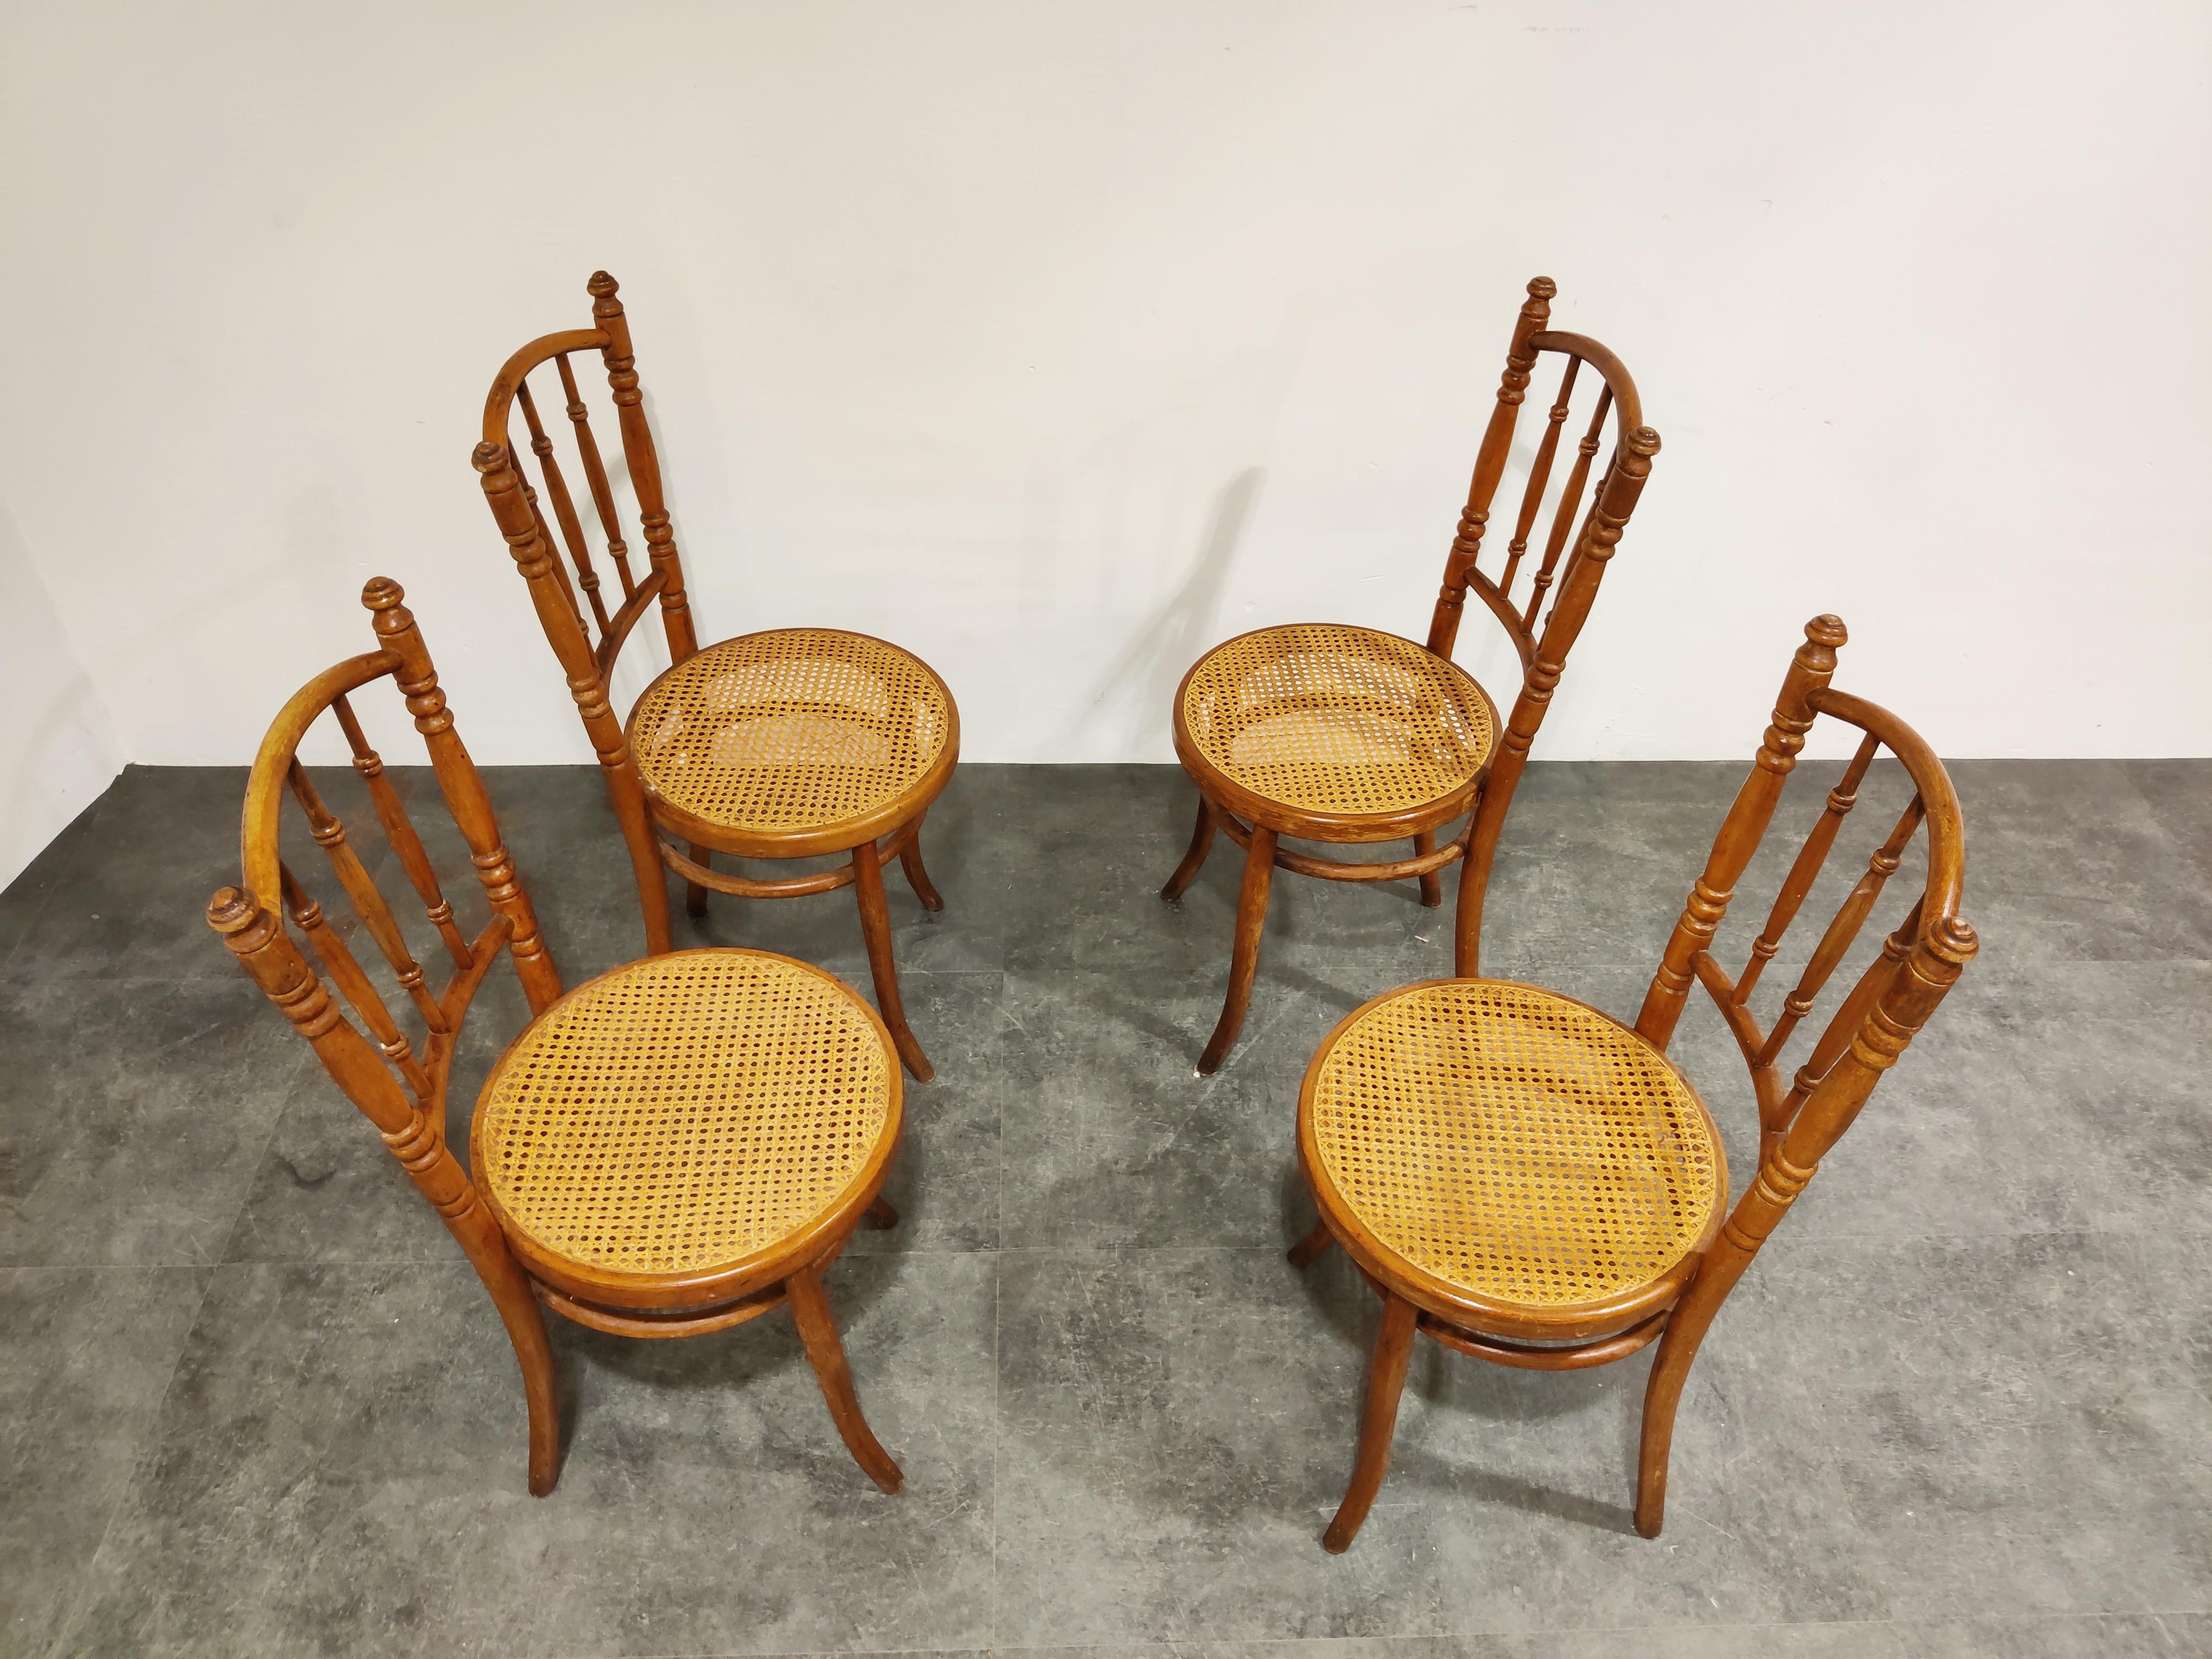 Set of 4 bentwooden dining chairs with rattan seats.

The chairs can be either from Thonet or J&J Kohn. They are not stamped. 

Good condition, no damages to the rattan. One finial has a light damage (as seen on the image). 

Due to their